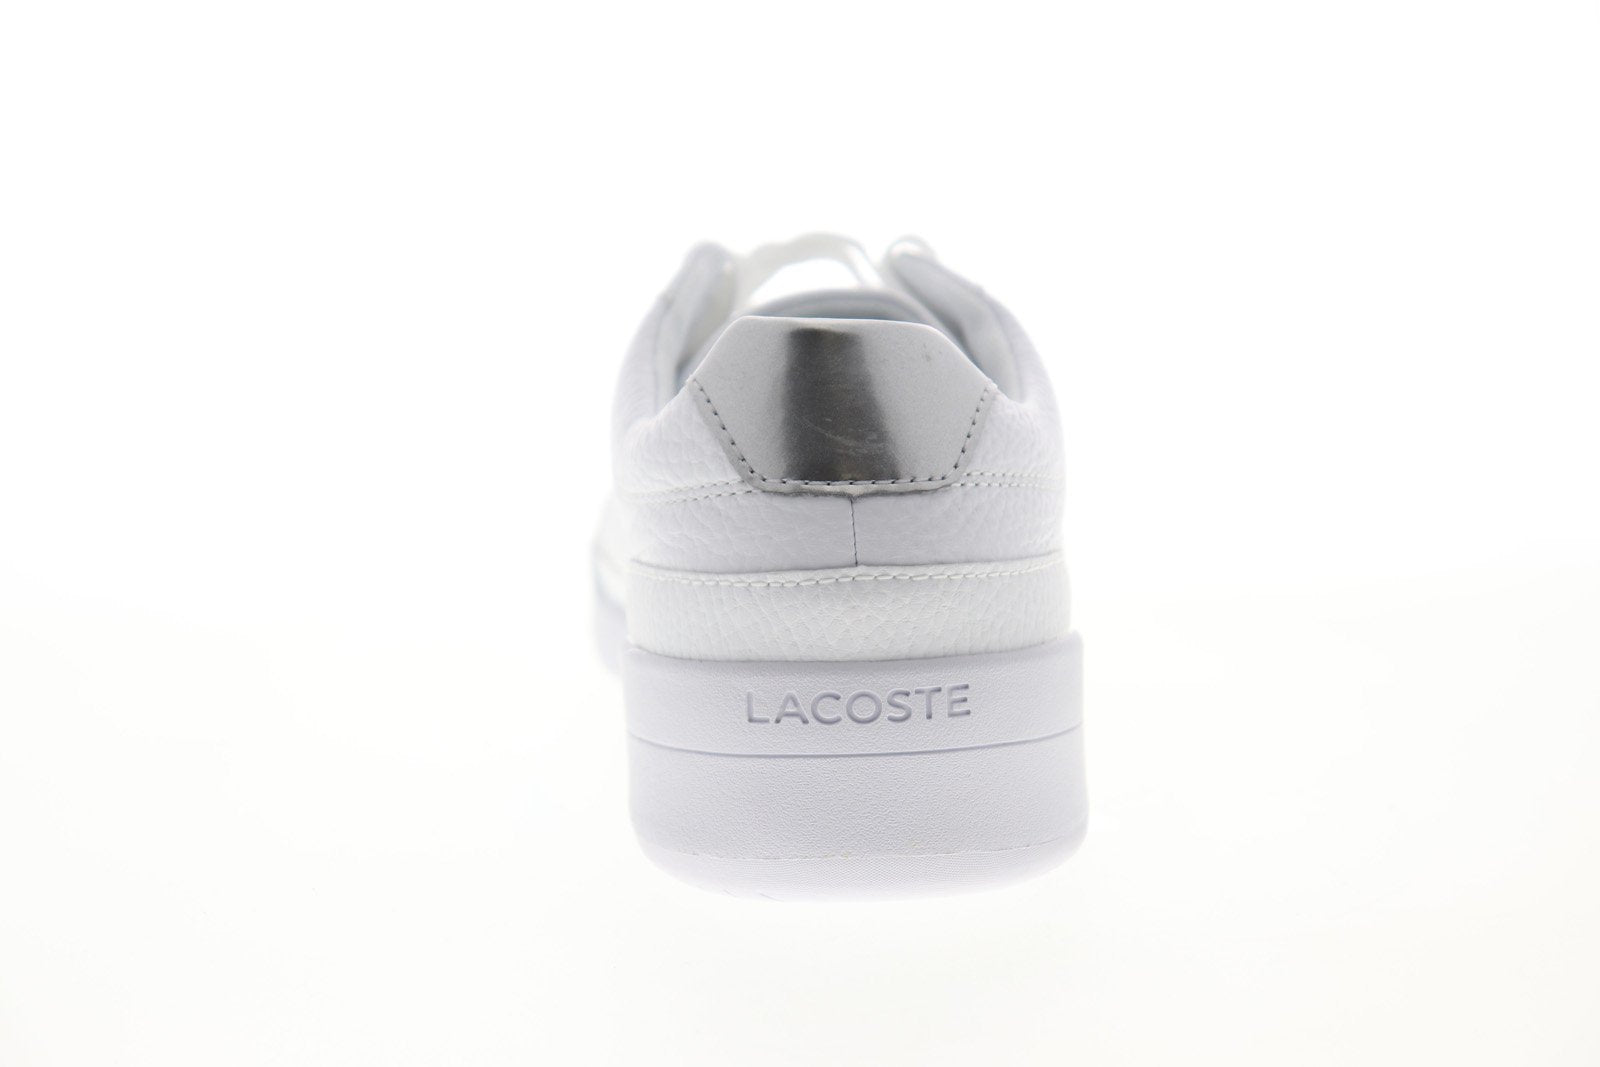 Lacoste Challenge 120 3 SMA Mens Leather Lifestyle Sneakers Shoe - Ruze Shoes